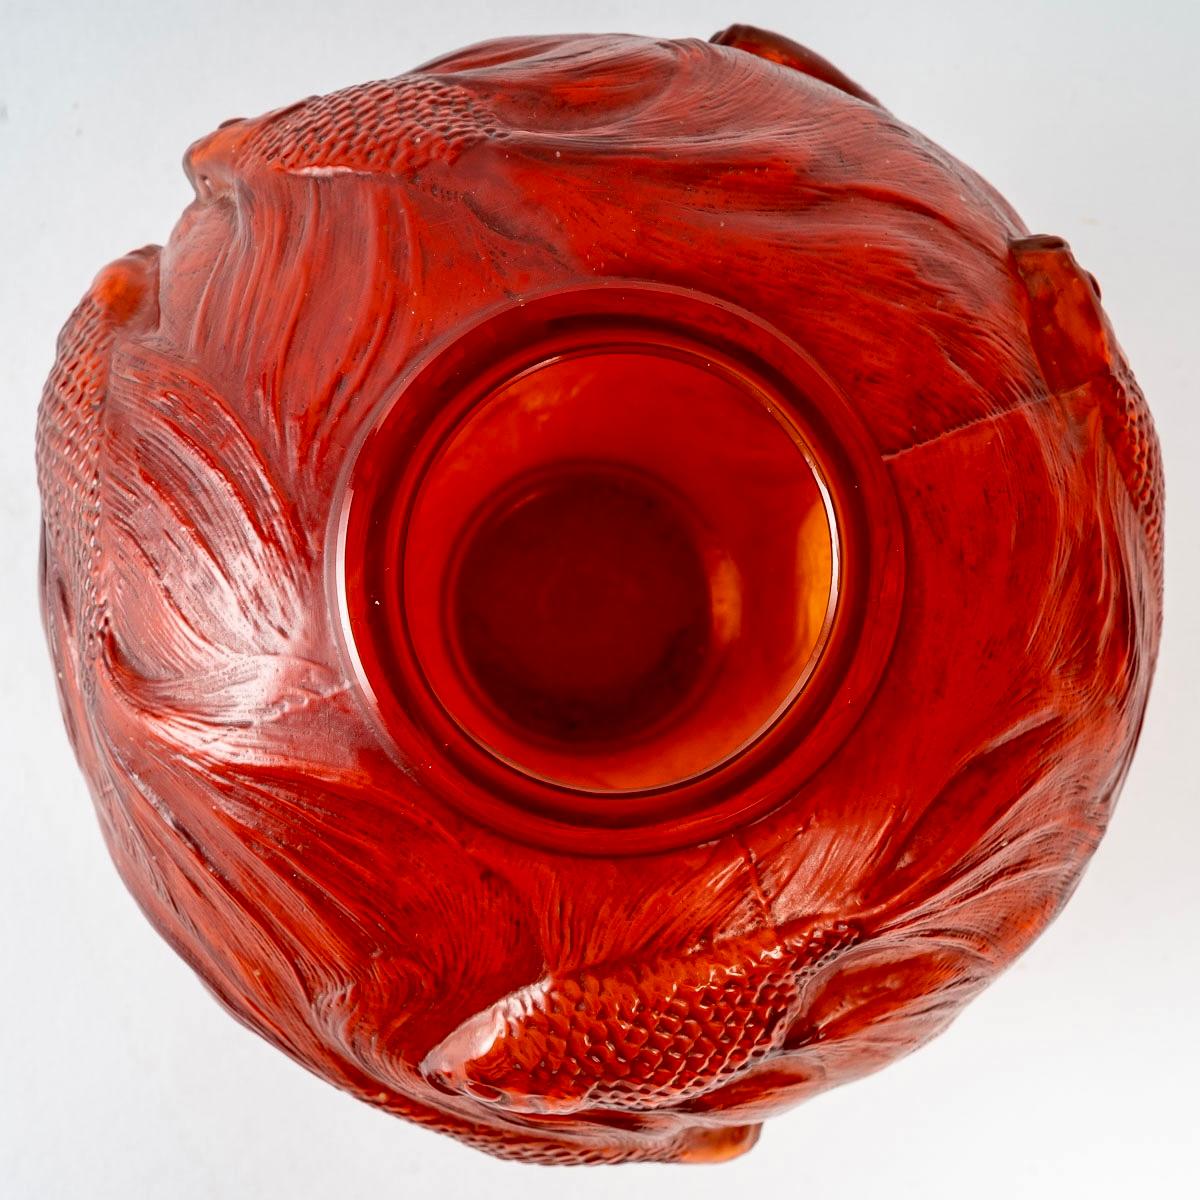 Molded 1924 Rene Lalique Formose Vase Double Cased Red Tomato Glass with Grey Patina